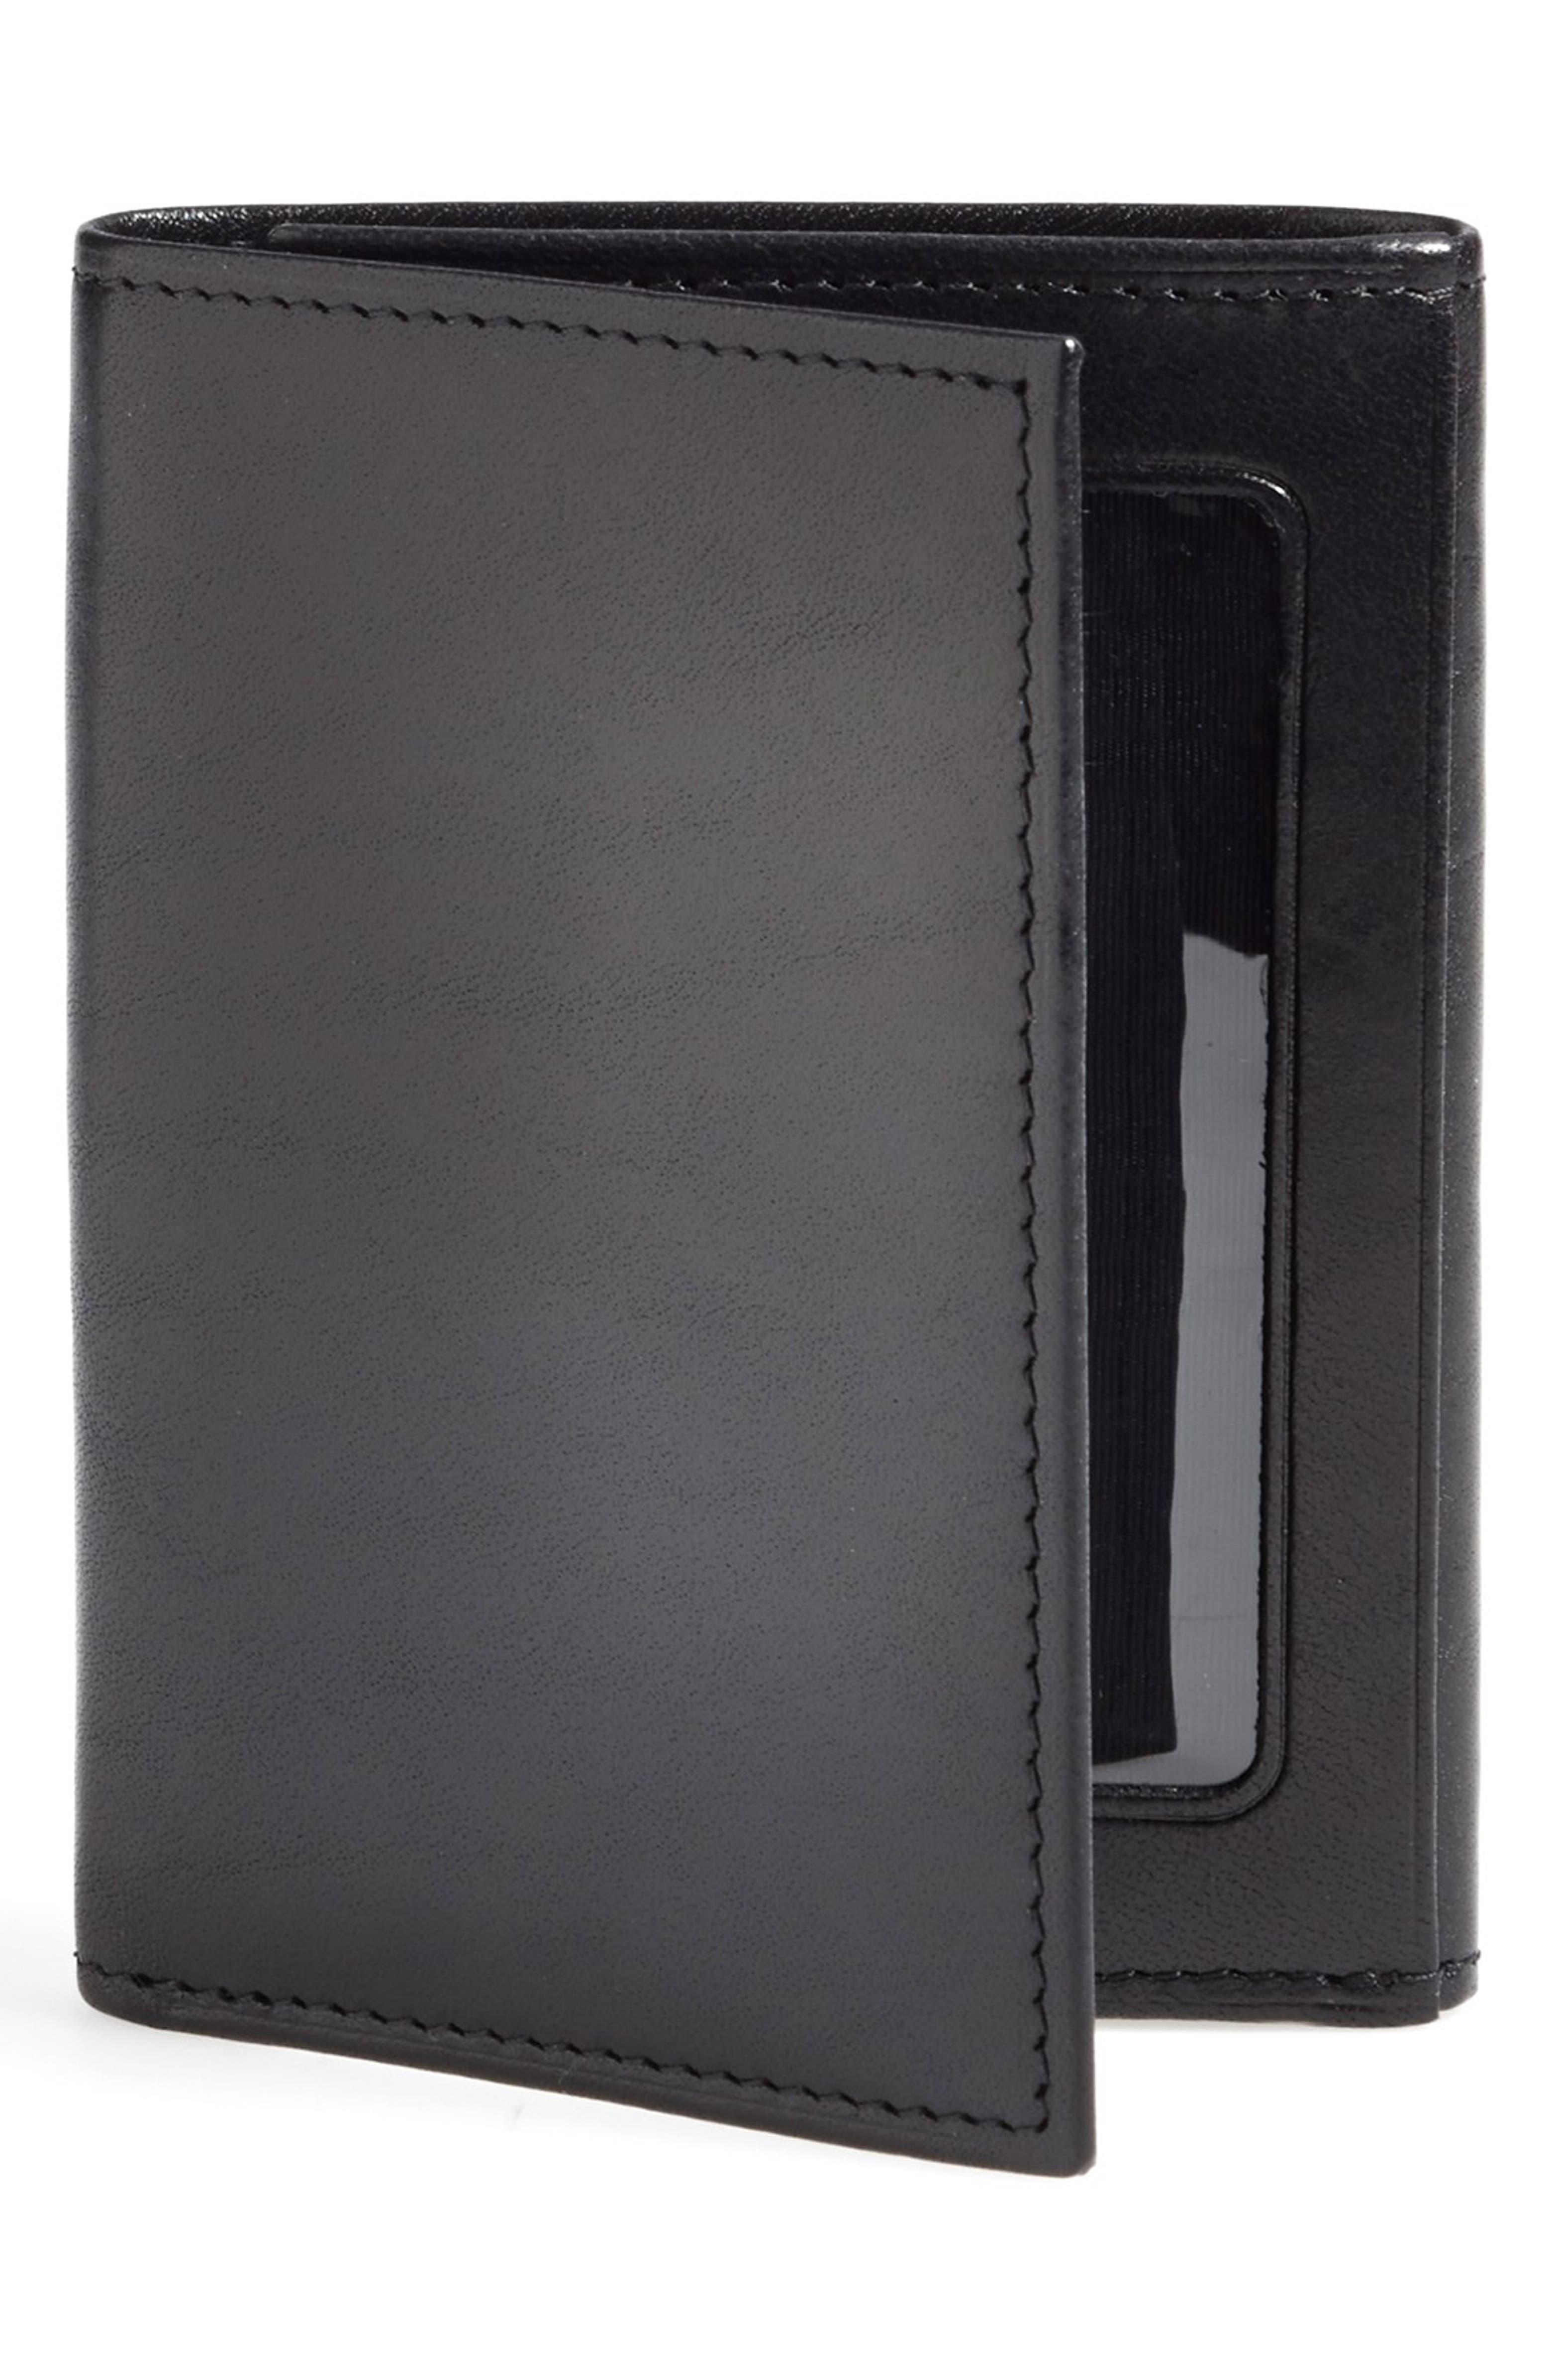 Bosca 'Old Leather' Trifold Wallet | Nordstrom